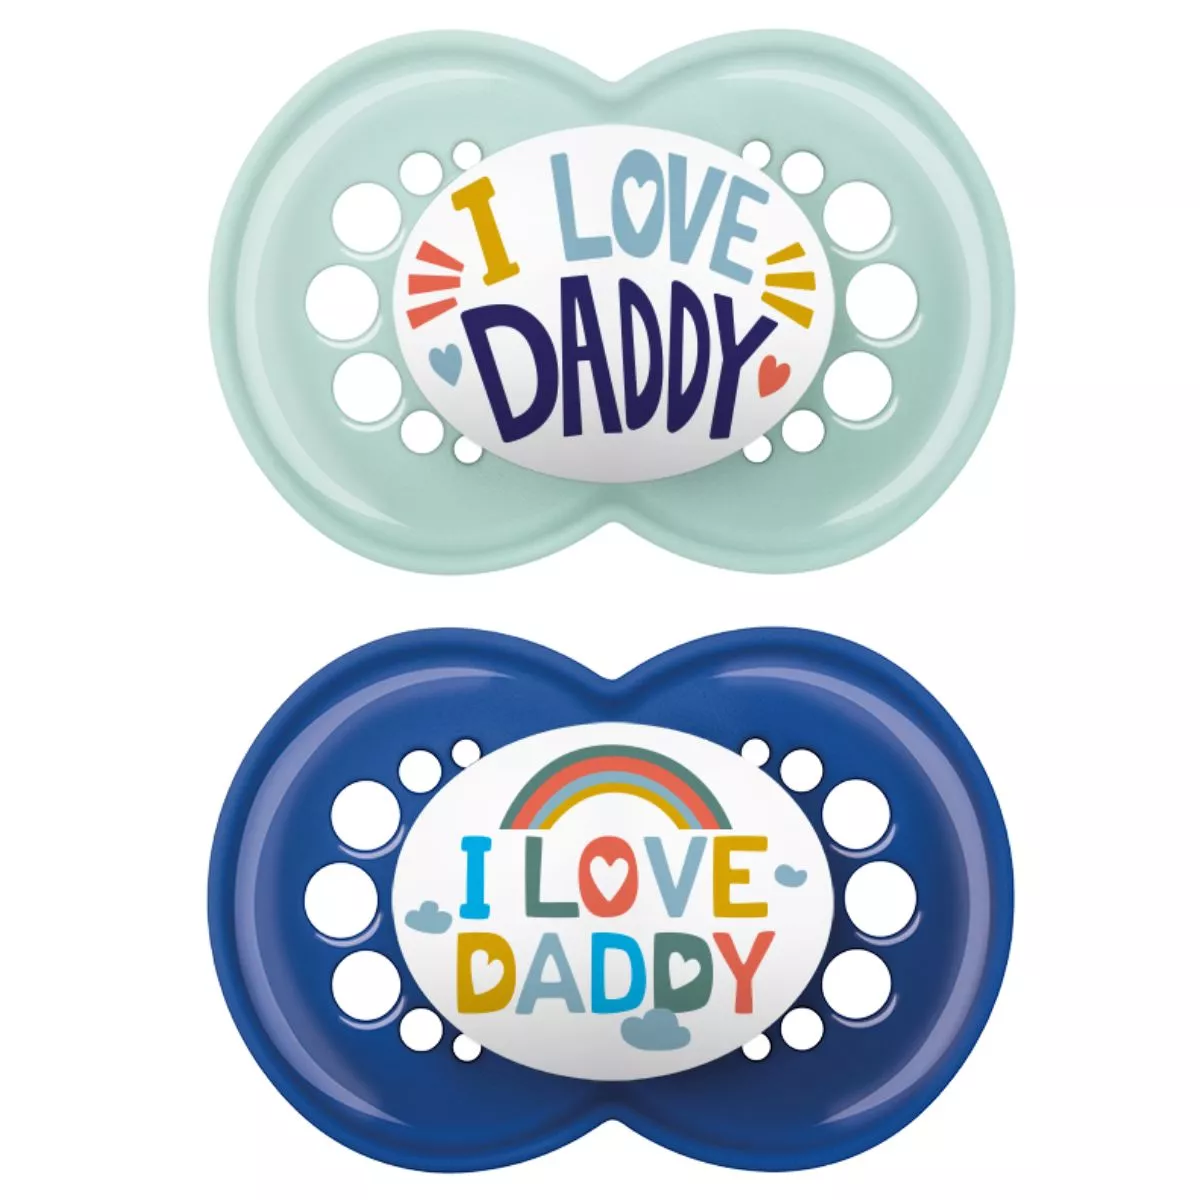 MAM Original 6+ Love Daddy - Soother